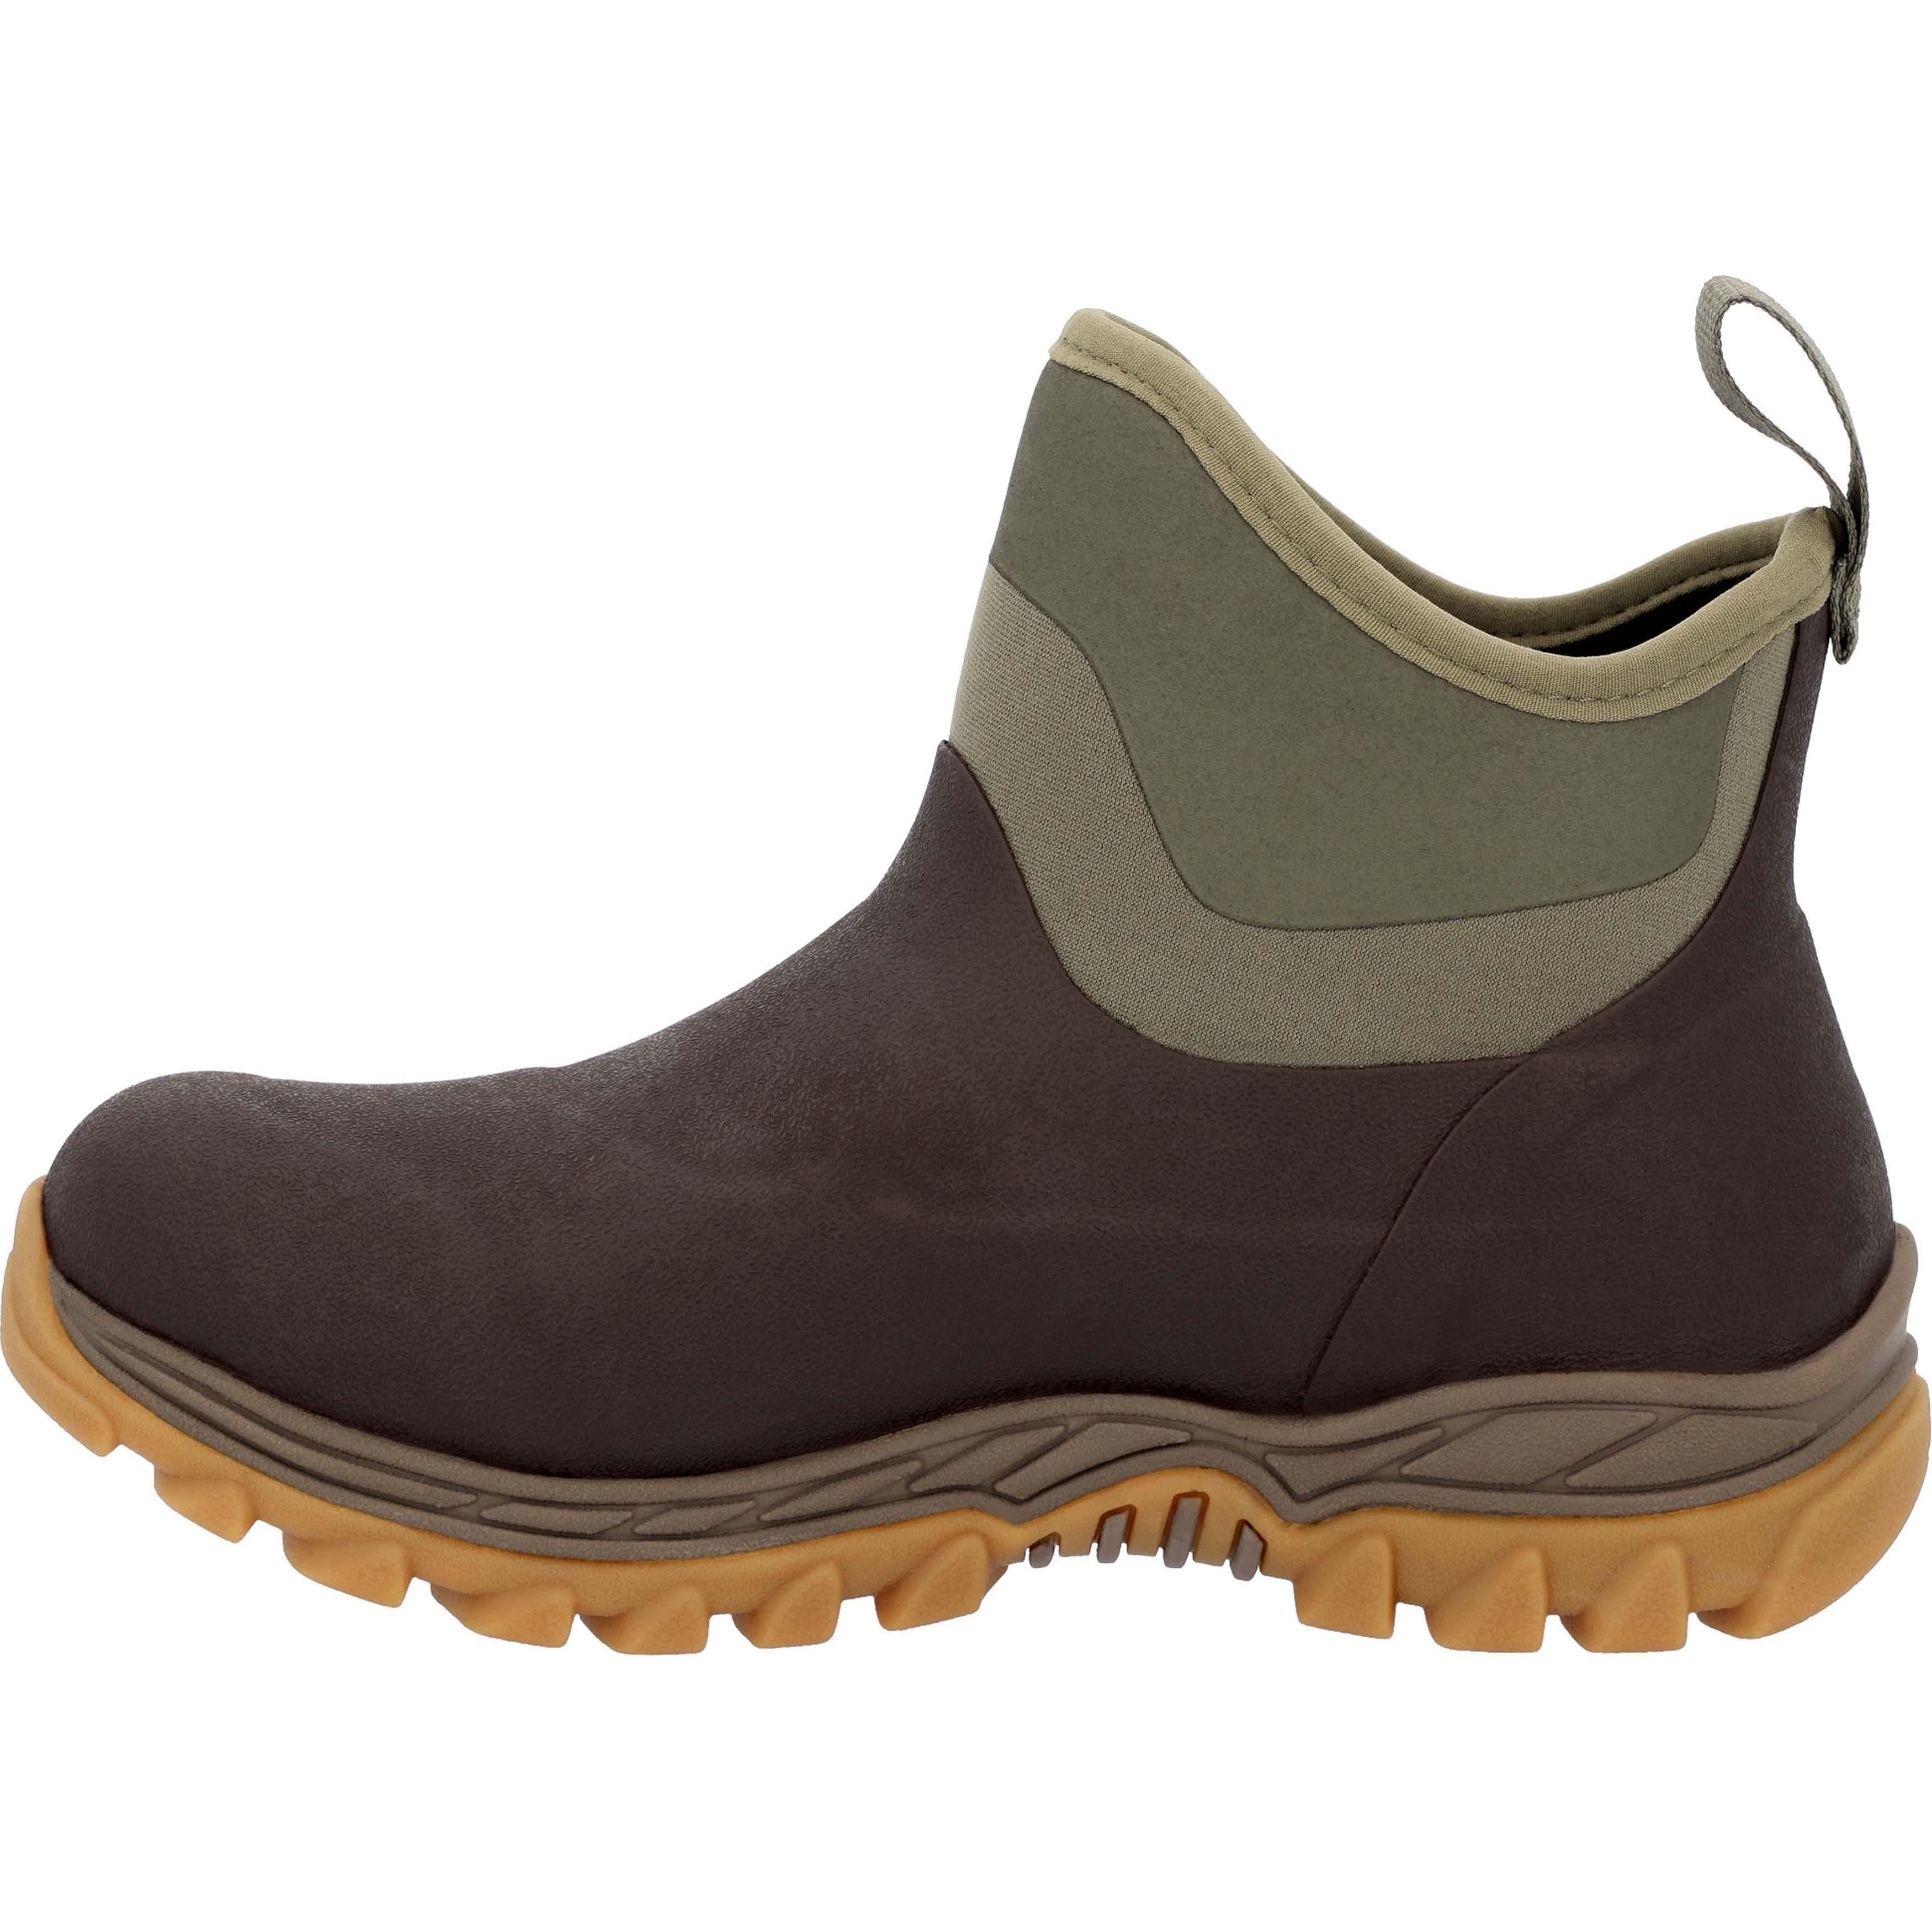 Shop for Muck Women's Ankle Boot, Arctic Sport II